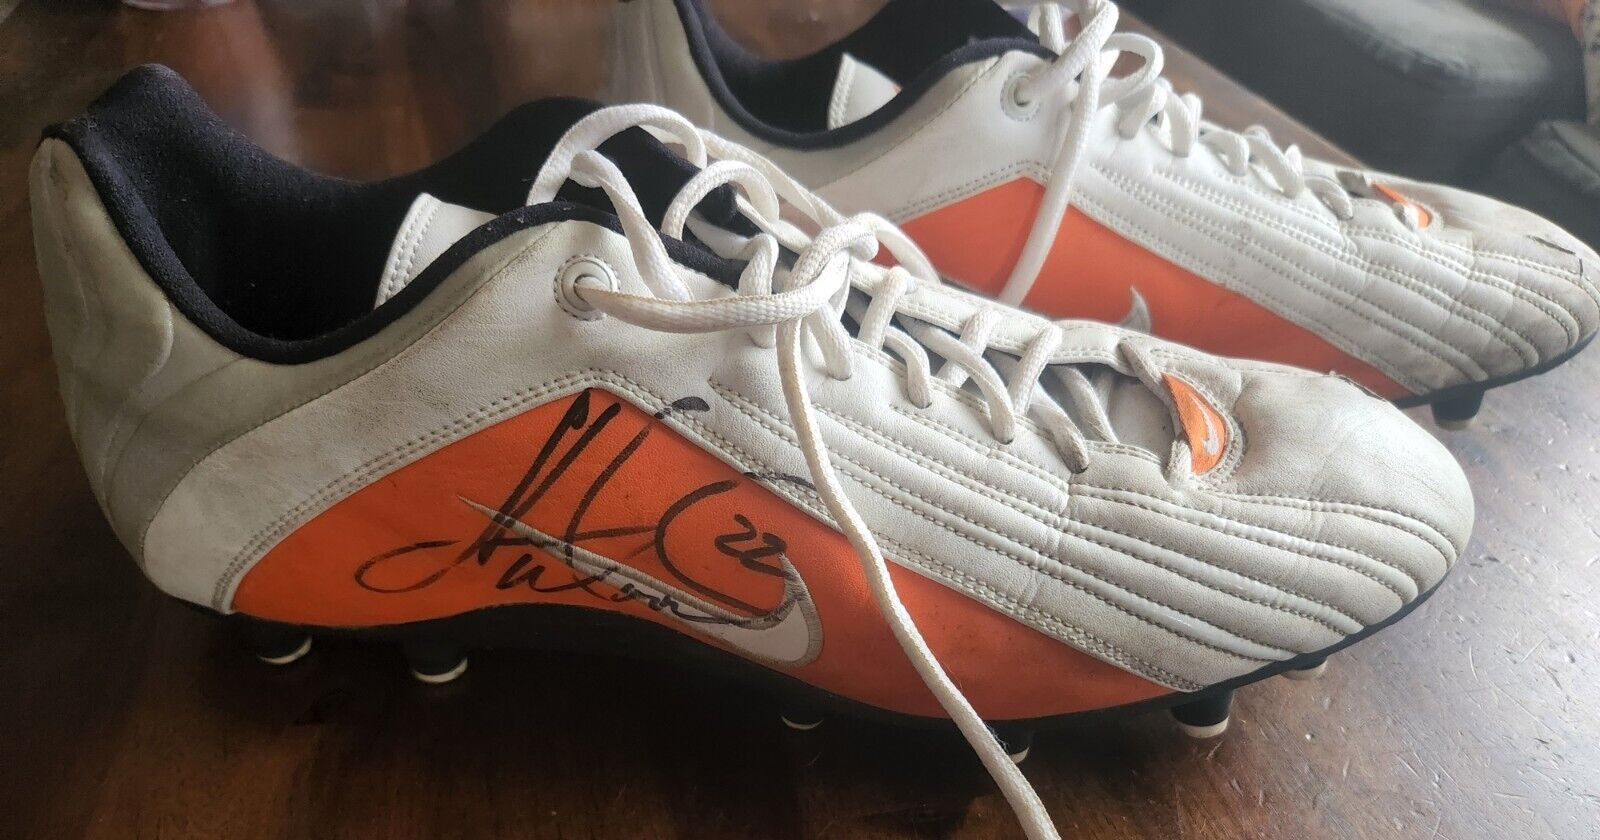 Miami Dolphins Shawn Wooden signed Game Used Cleats with Letter Of Authenticity